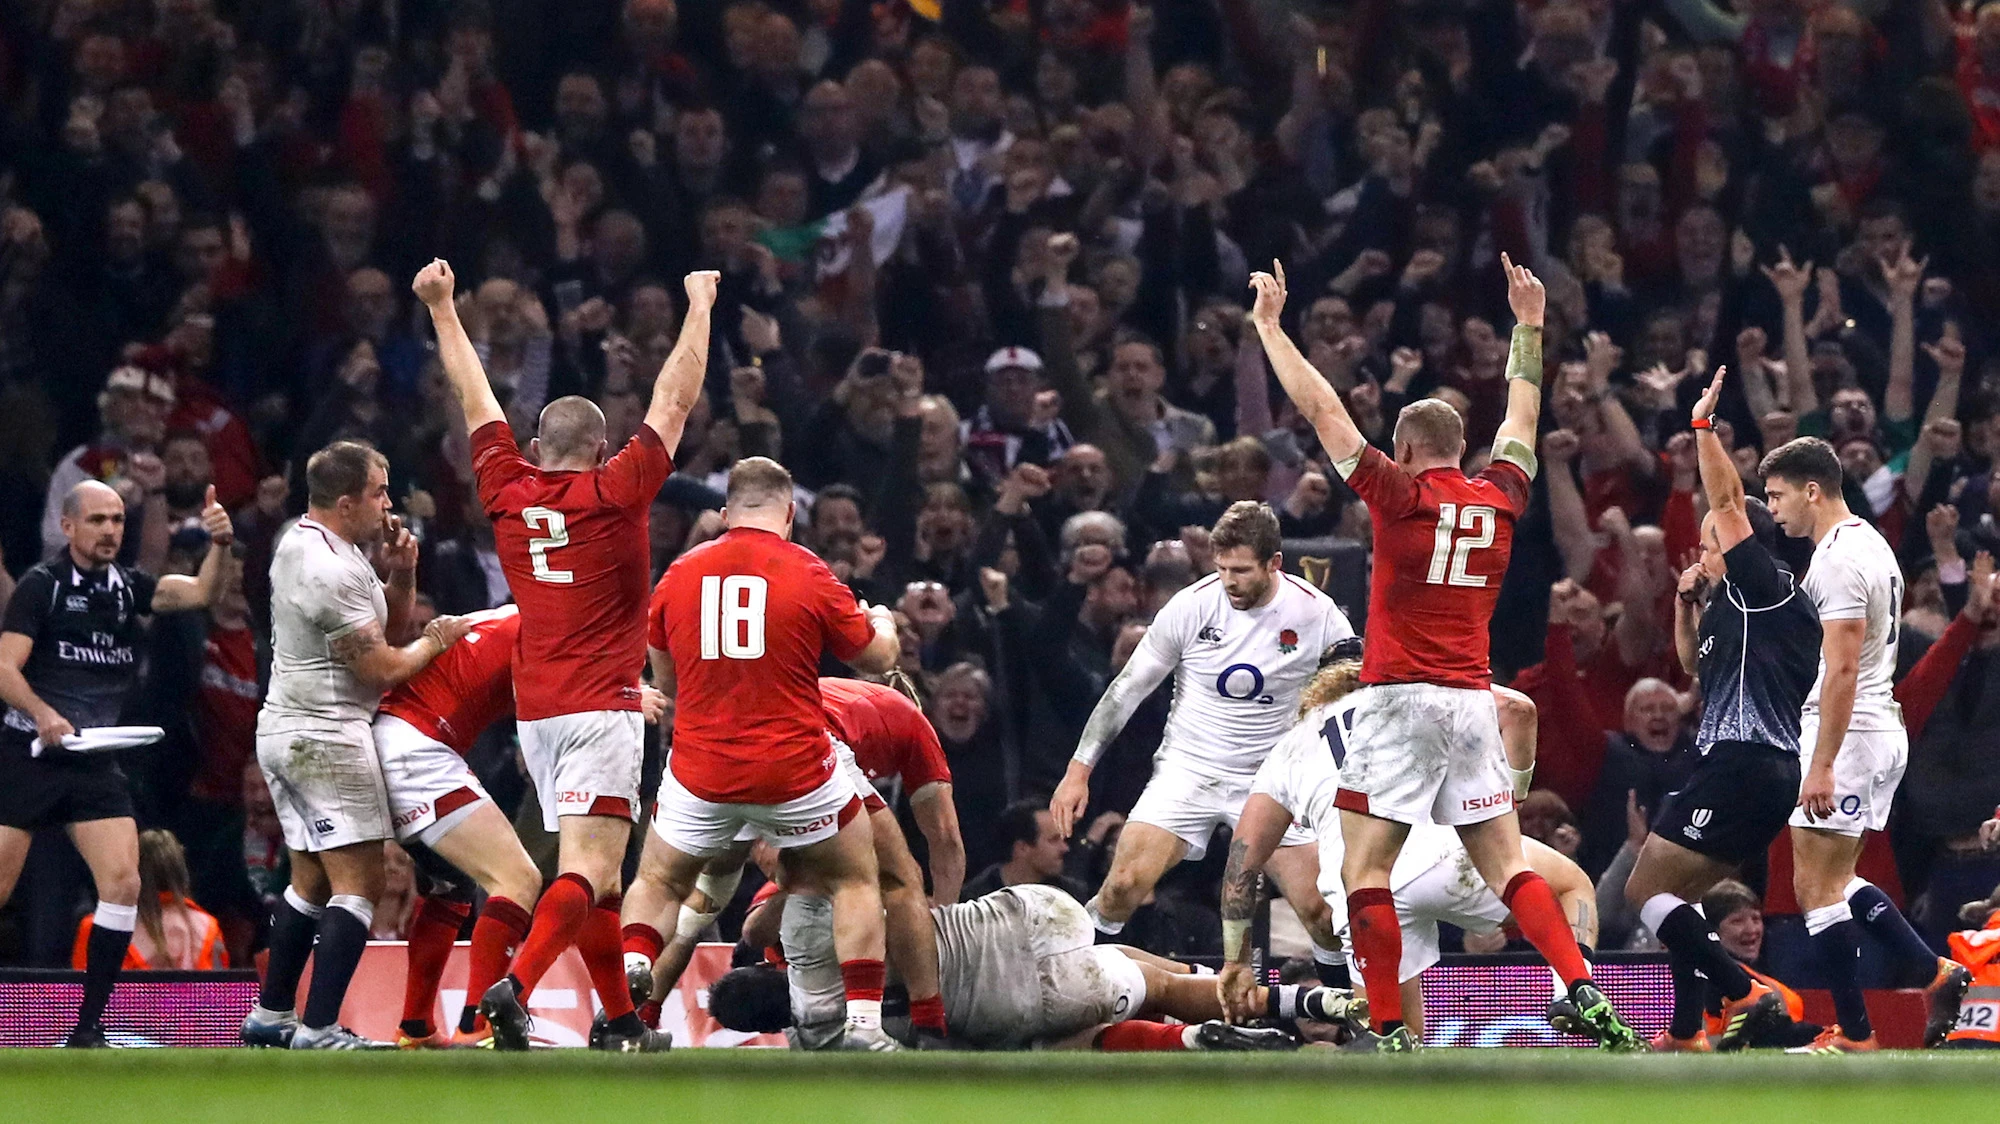 Wales players celebrate Cory Hill scoring their first try 23/2/2019